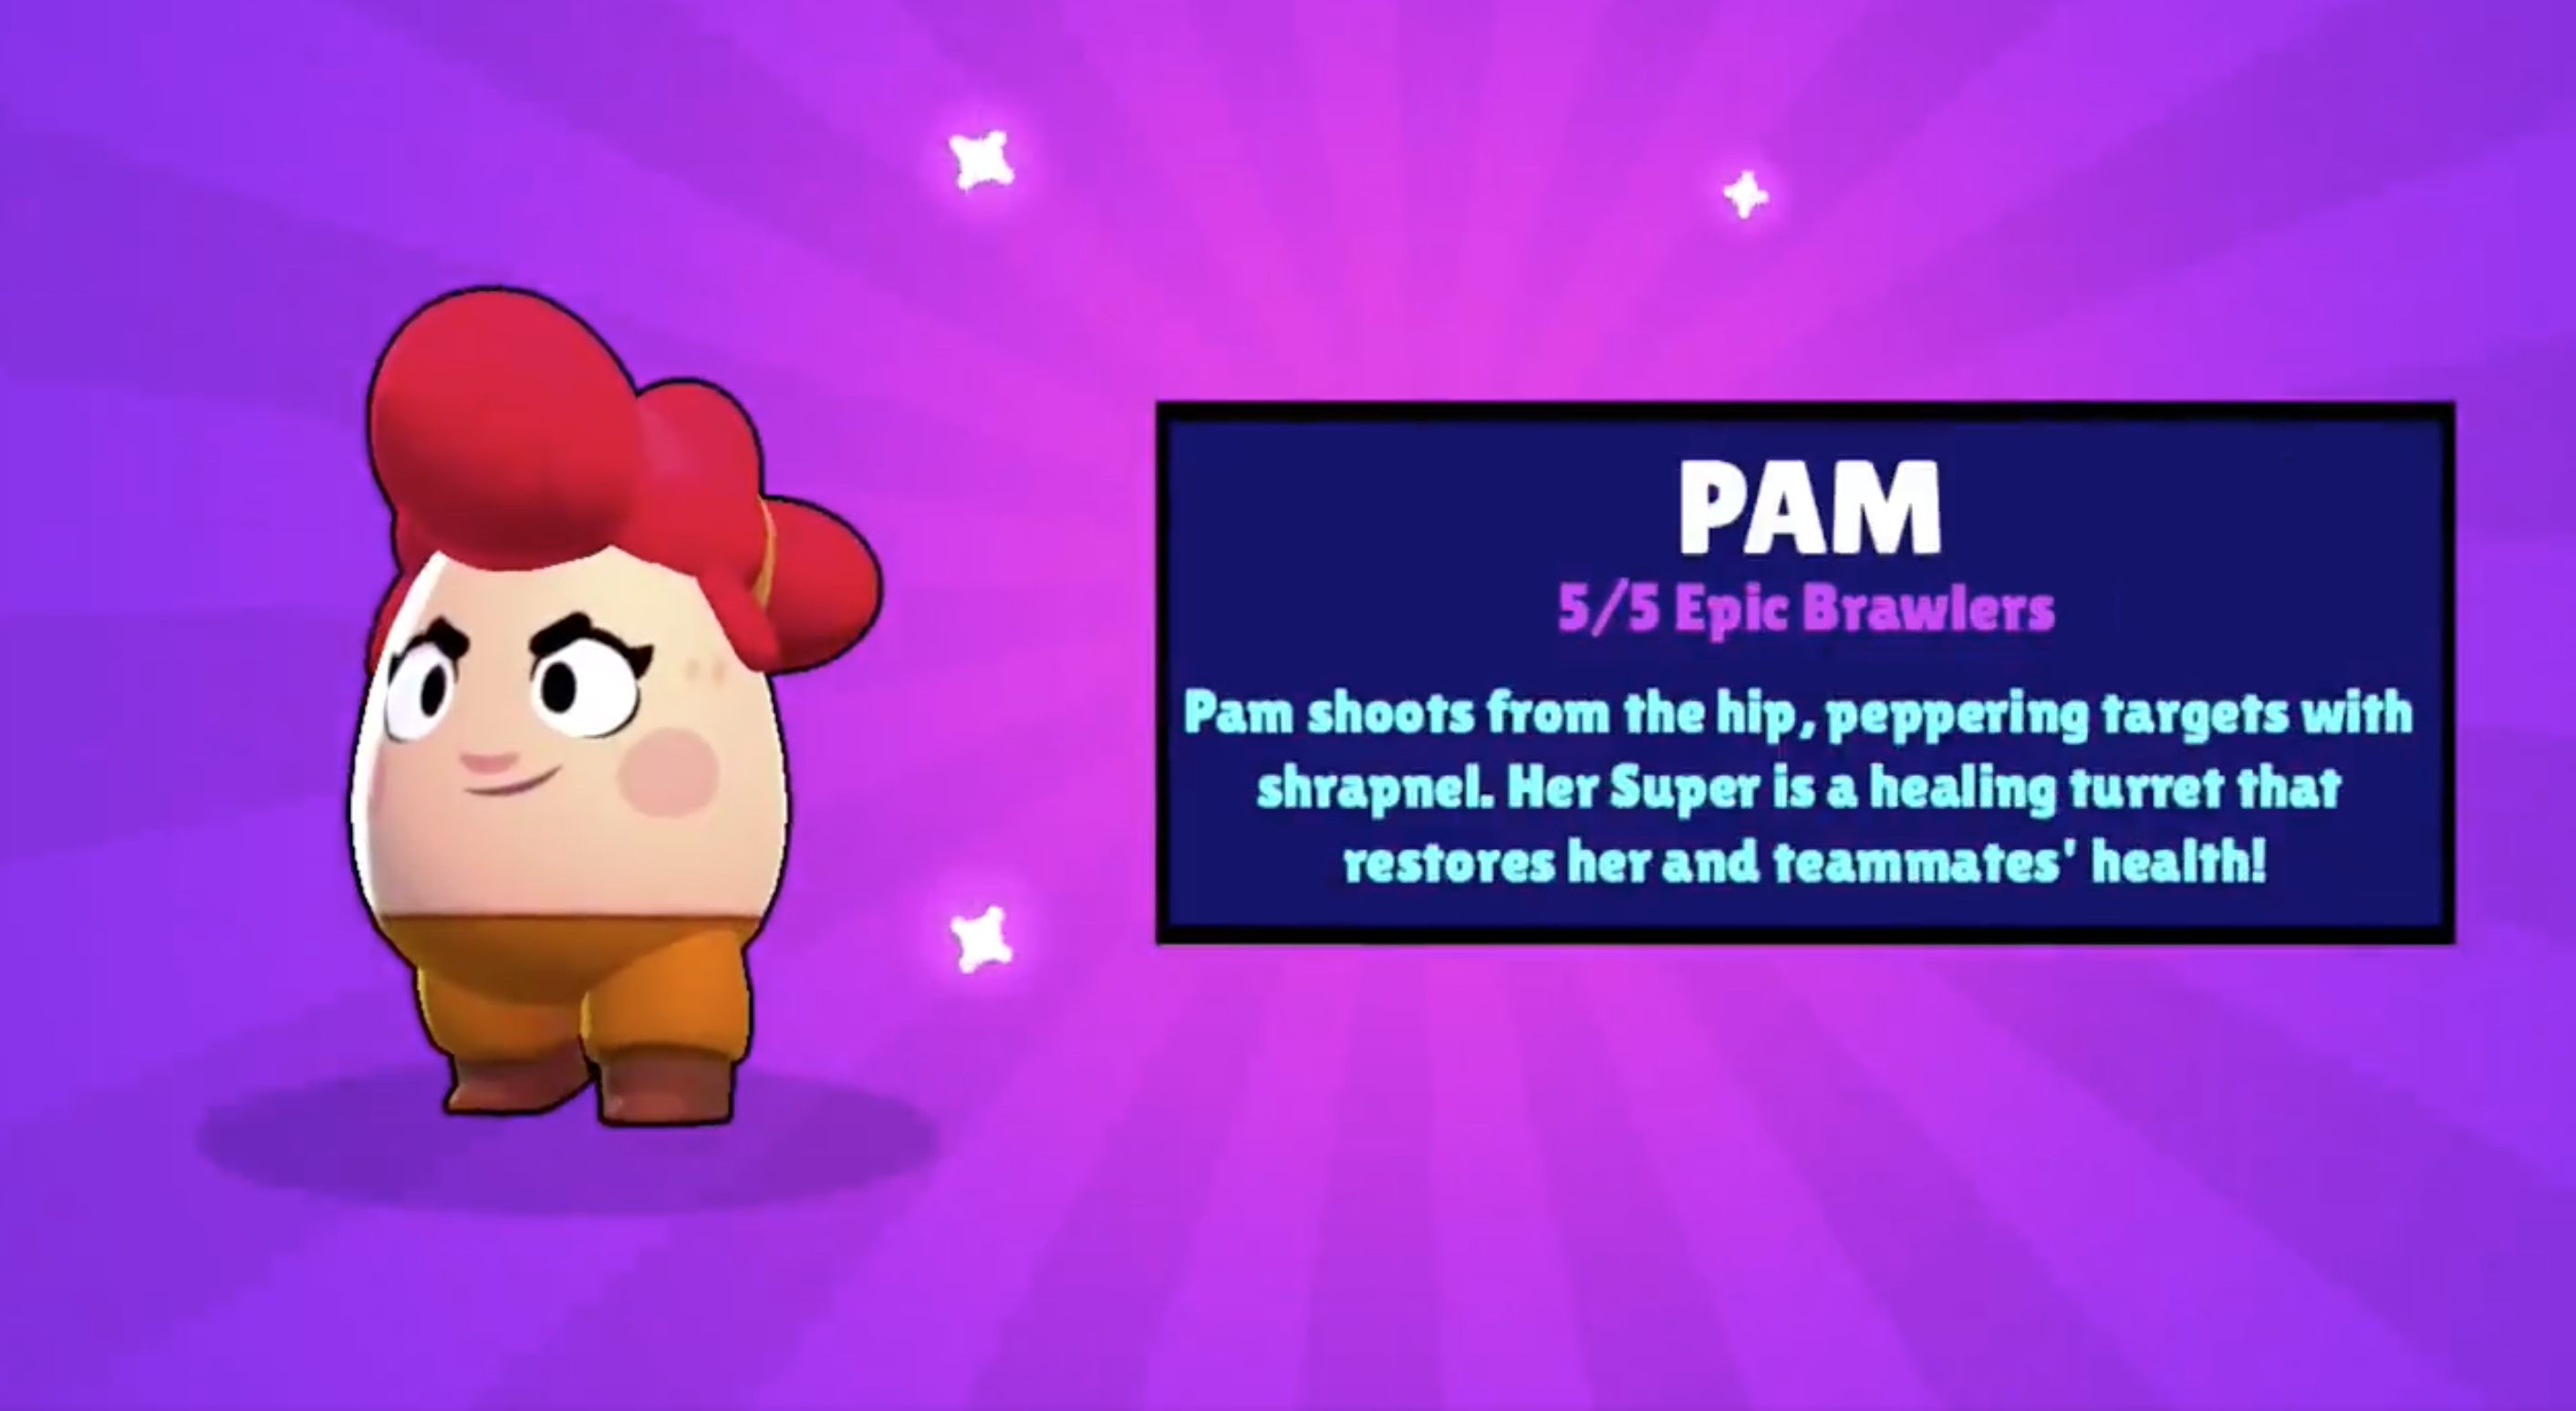 How Did April Fools Show In Mobile Games Gamerefinery - new brawl stars skins fanmade